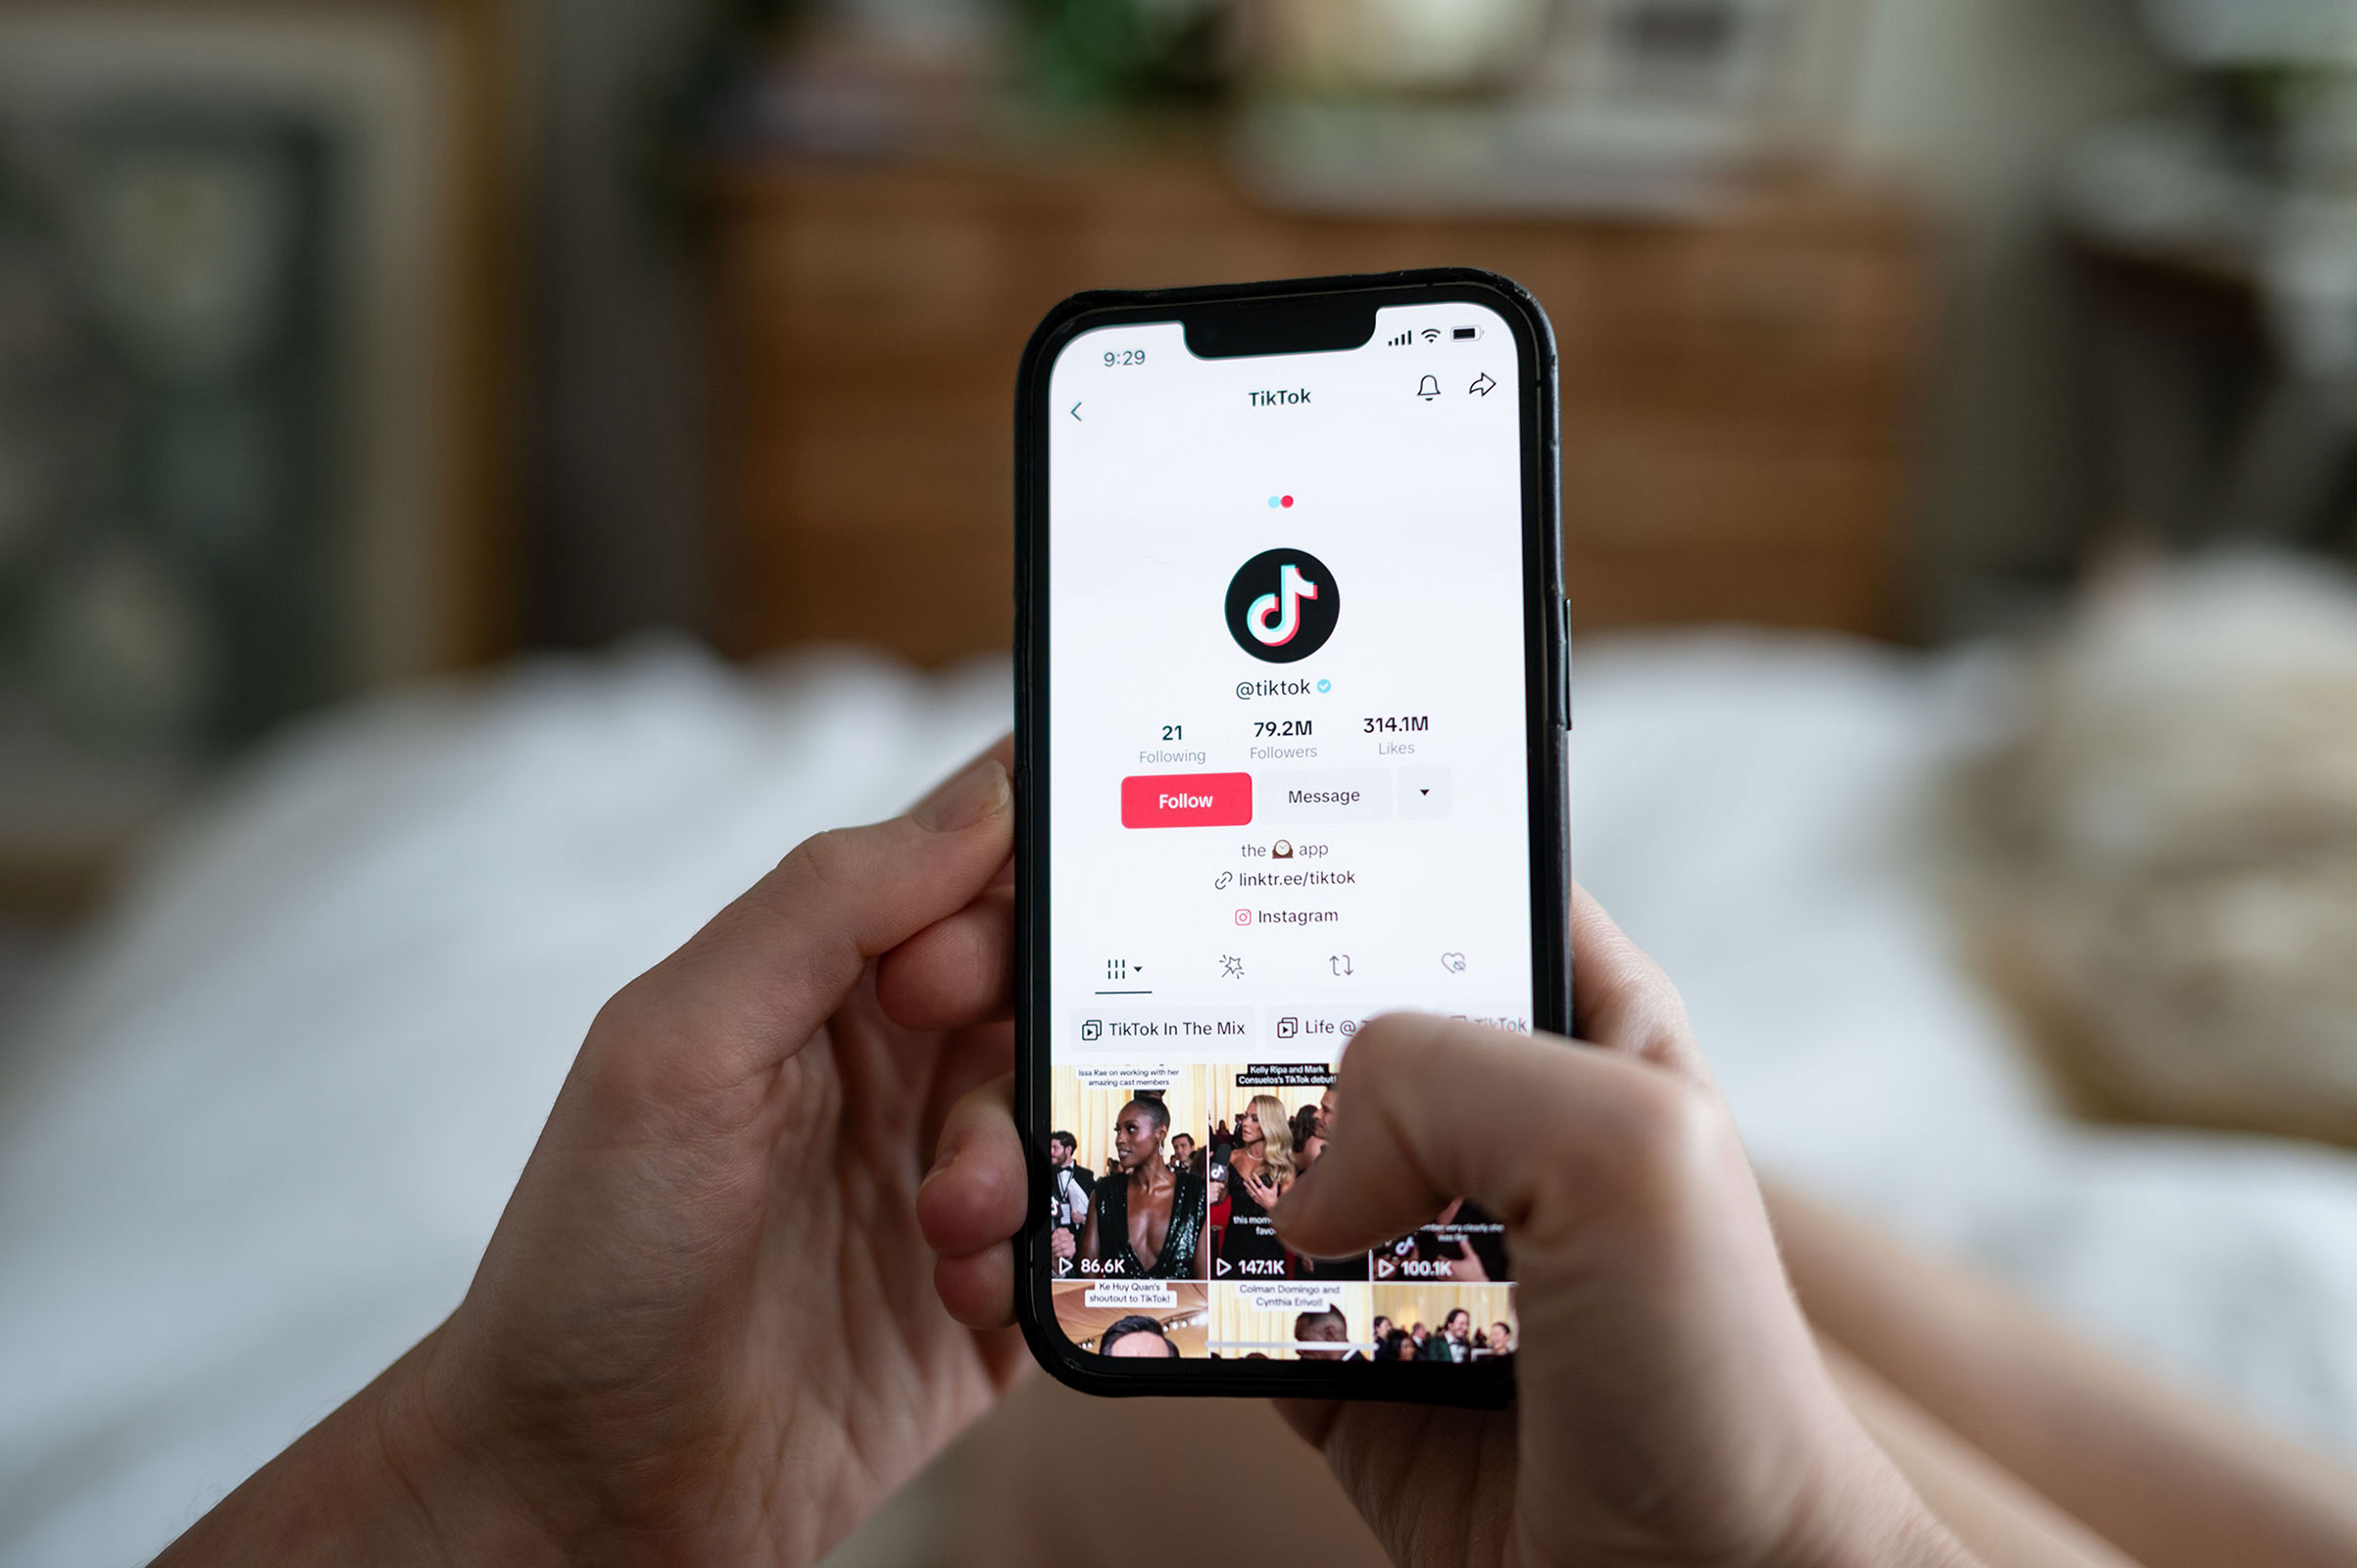 The US House of Representatives is set to vote on legislation that would ban TikTok, a major challenge to one of the world’s most popular social media apps used by 170 million Americans, unless it part ways with its Chinese parent company, ByteDance.